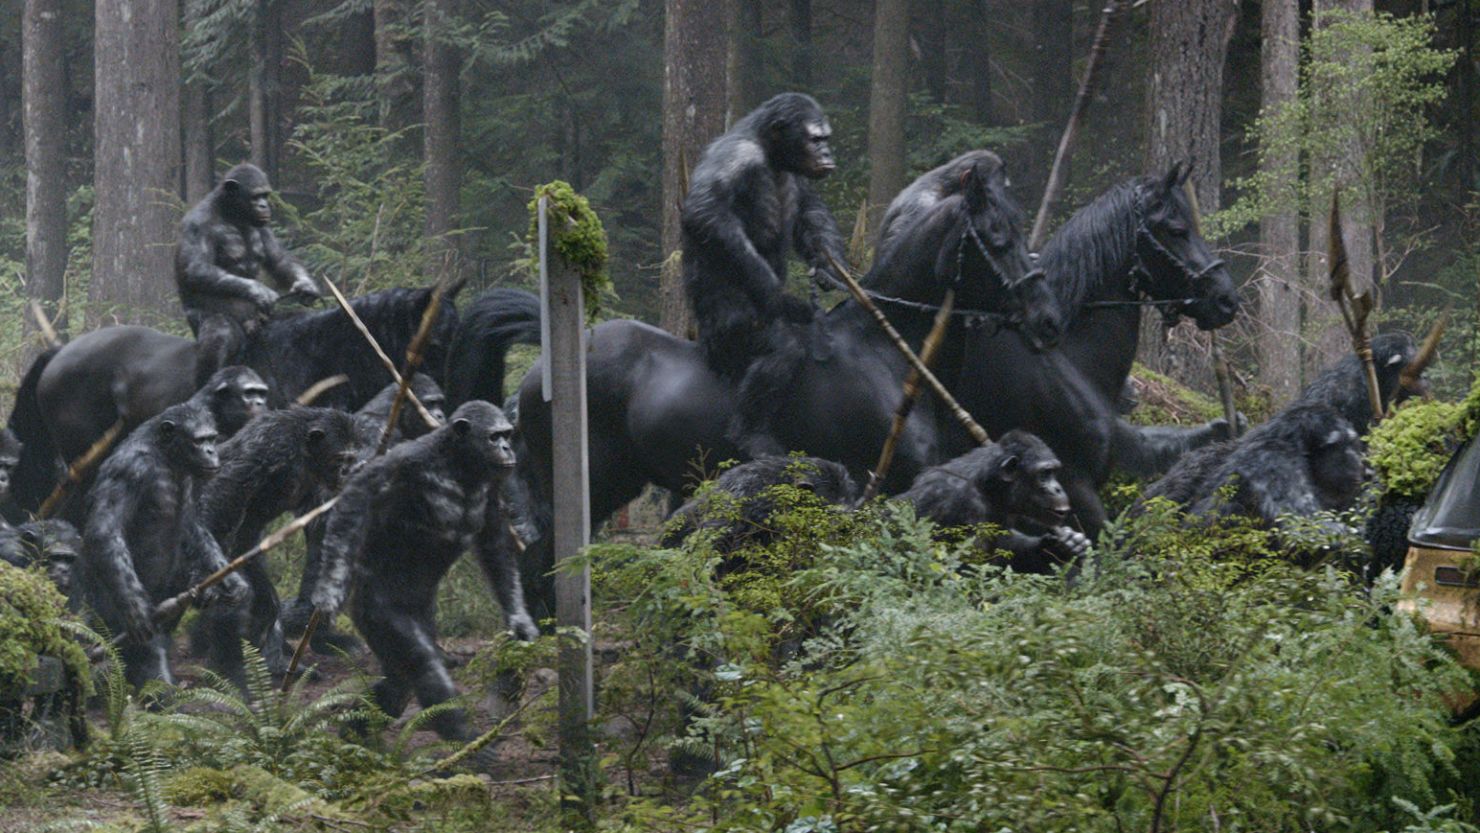 "Dawn of the Planet of the Apes" is directed by Matt Reeves.